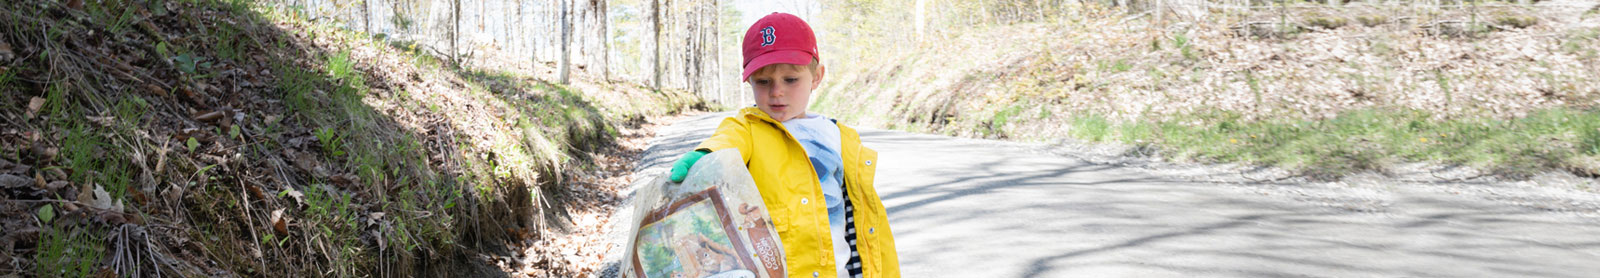 Photo of a little boy wearing a yellow rain coat and holding litter he picked up off the ground